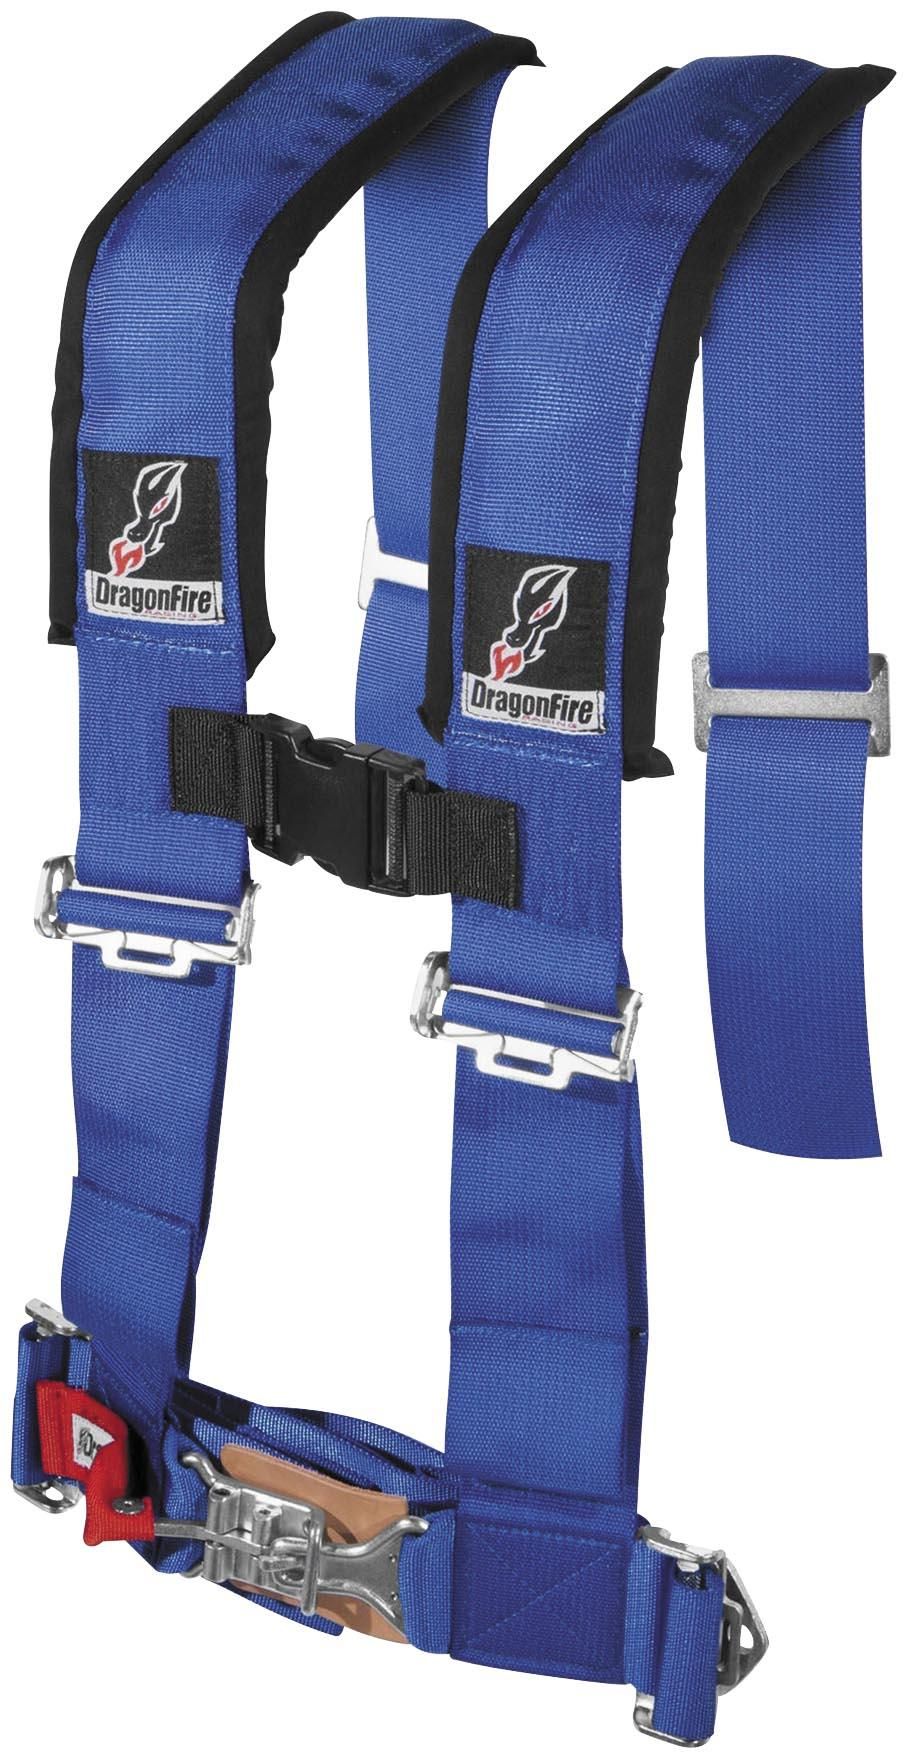 4M03-DRAGONFIRE-14-0032 4-Point Racing Harness Restraints - 3in. Sewn Blue